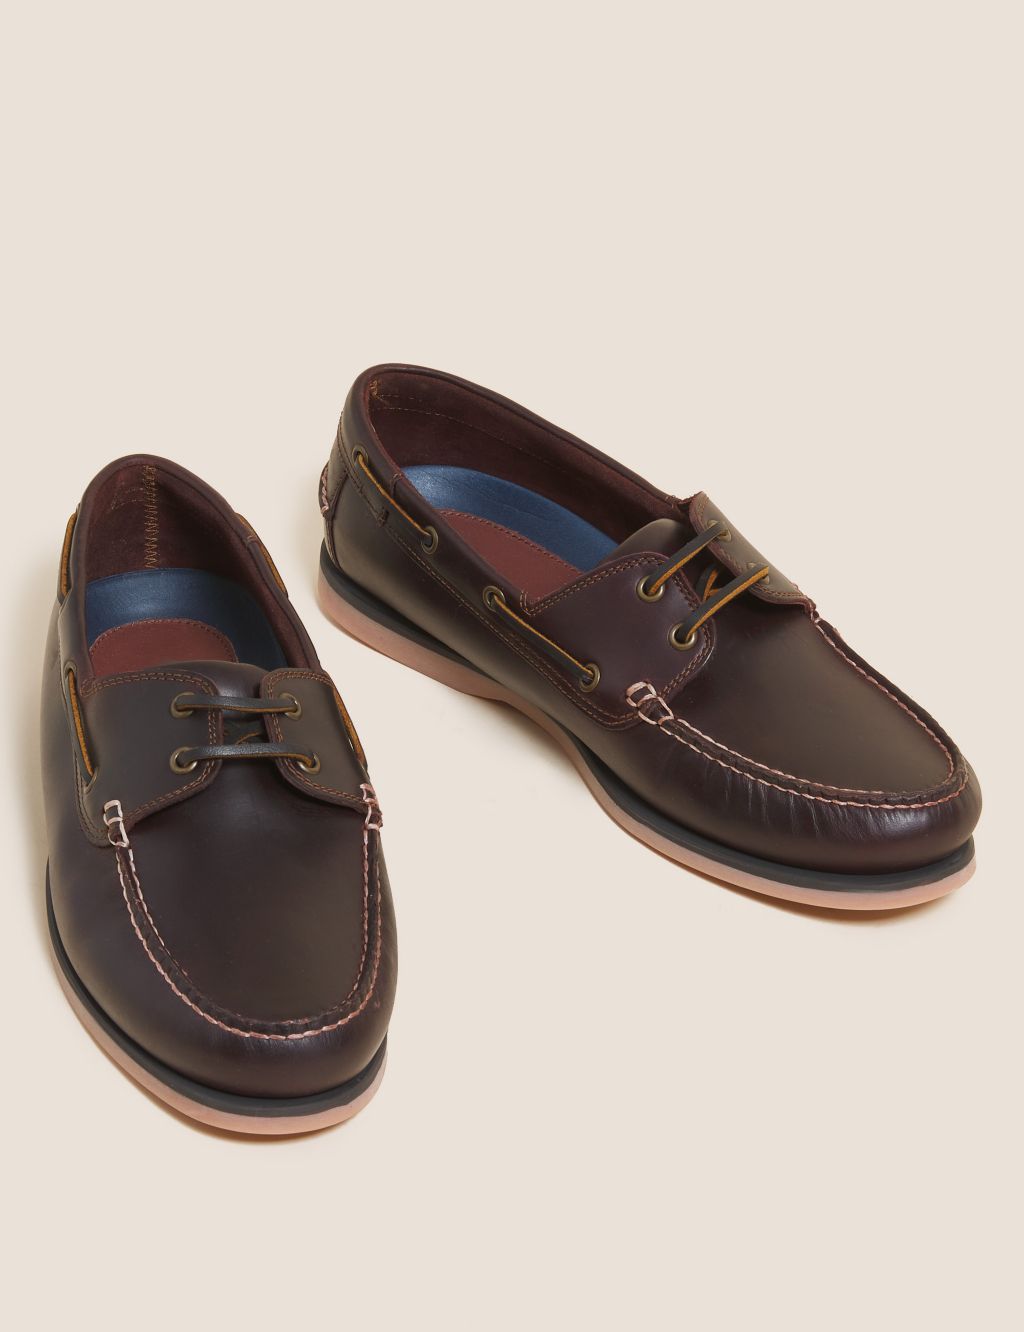 Wide Fit Leather Boat Shoes image 3